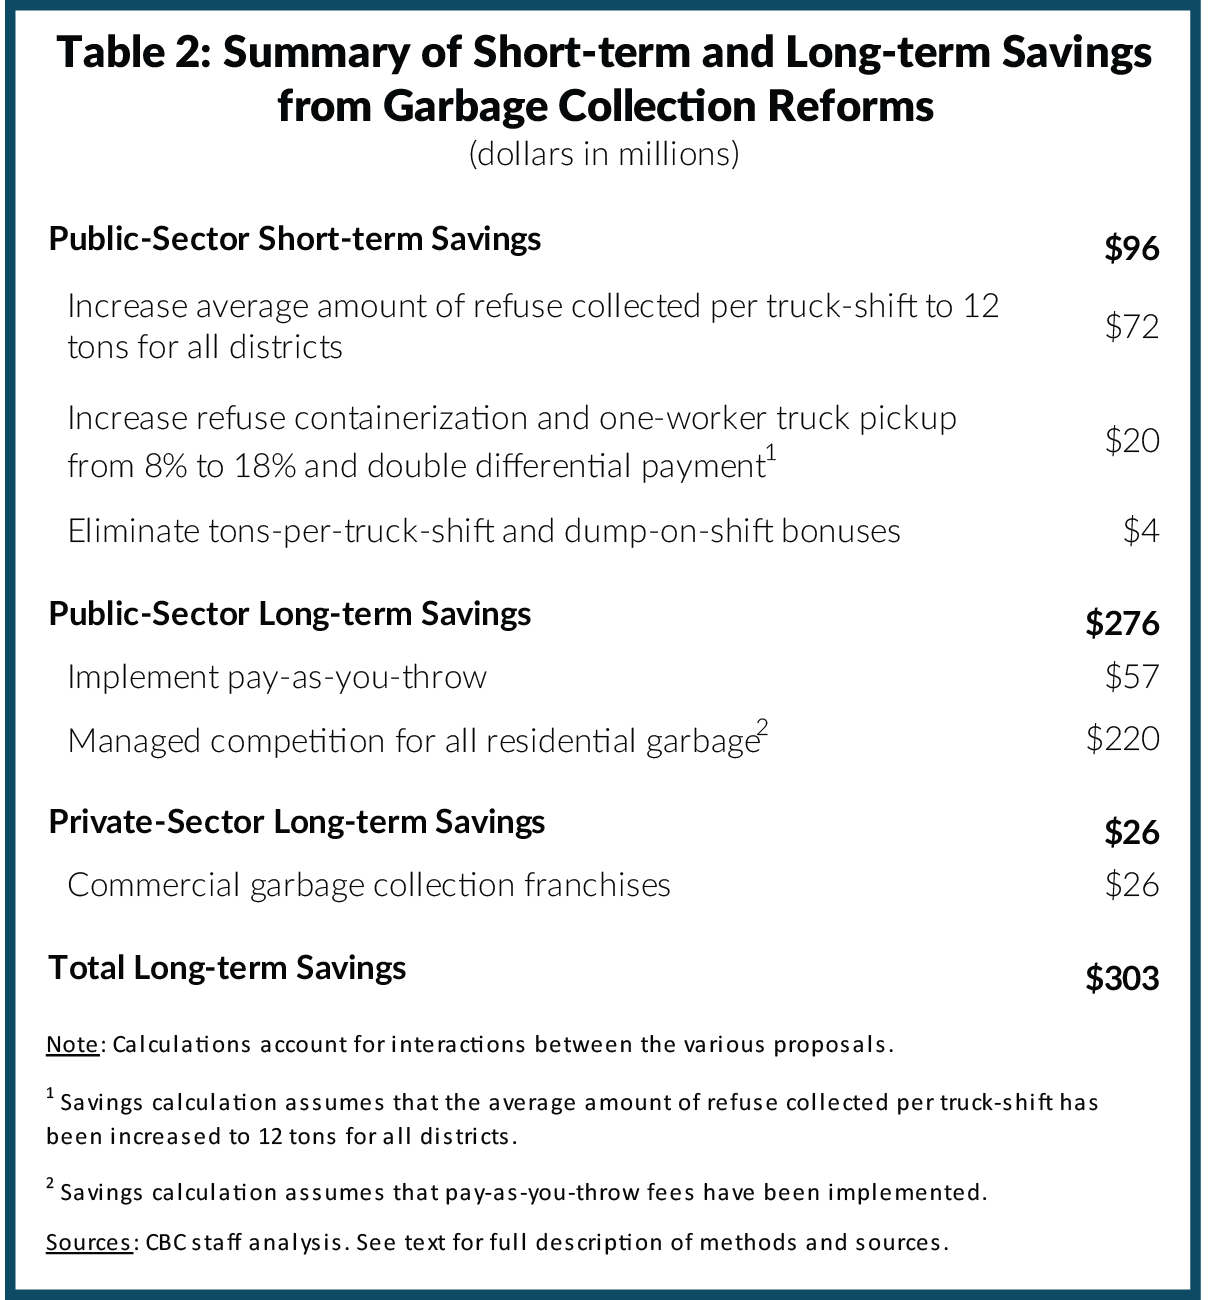 Table 2: Summary of Short-term and Long-term Savings from Garbage Collection Reforms